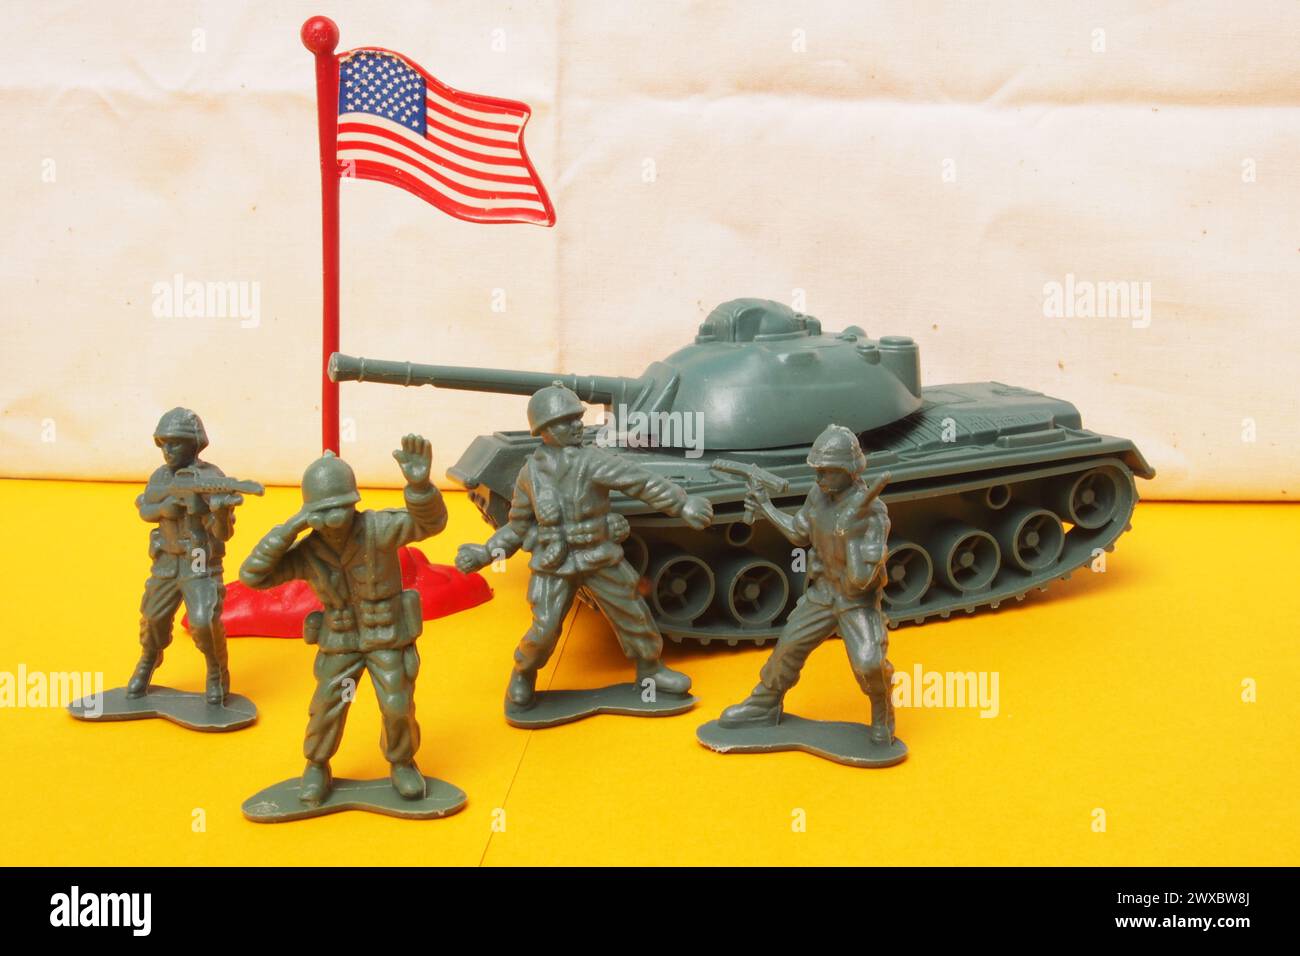 Retro toy soldiers with guns, binoculars, an army tank and the American stars and stripes flag Stock Photo